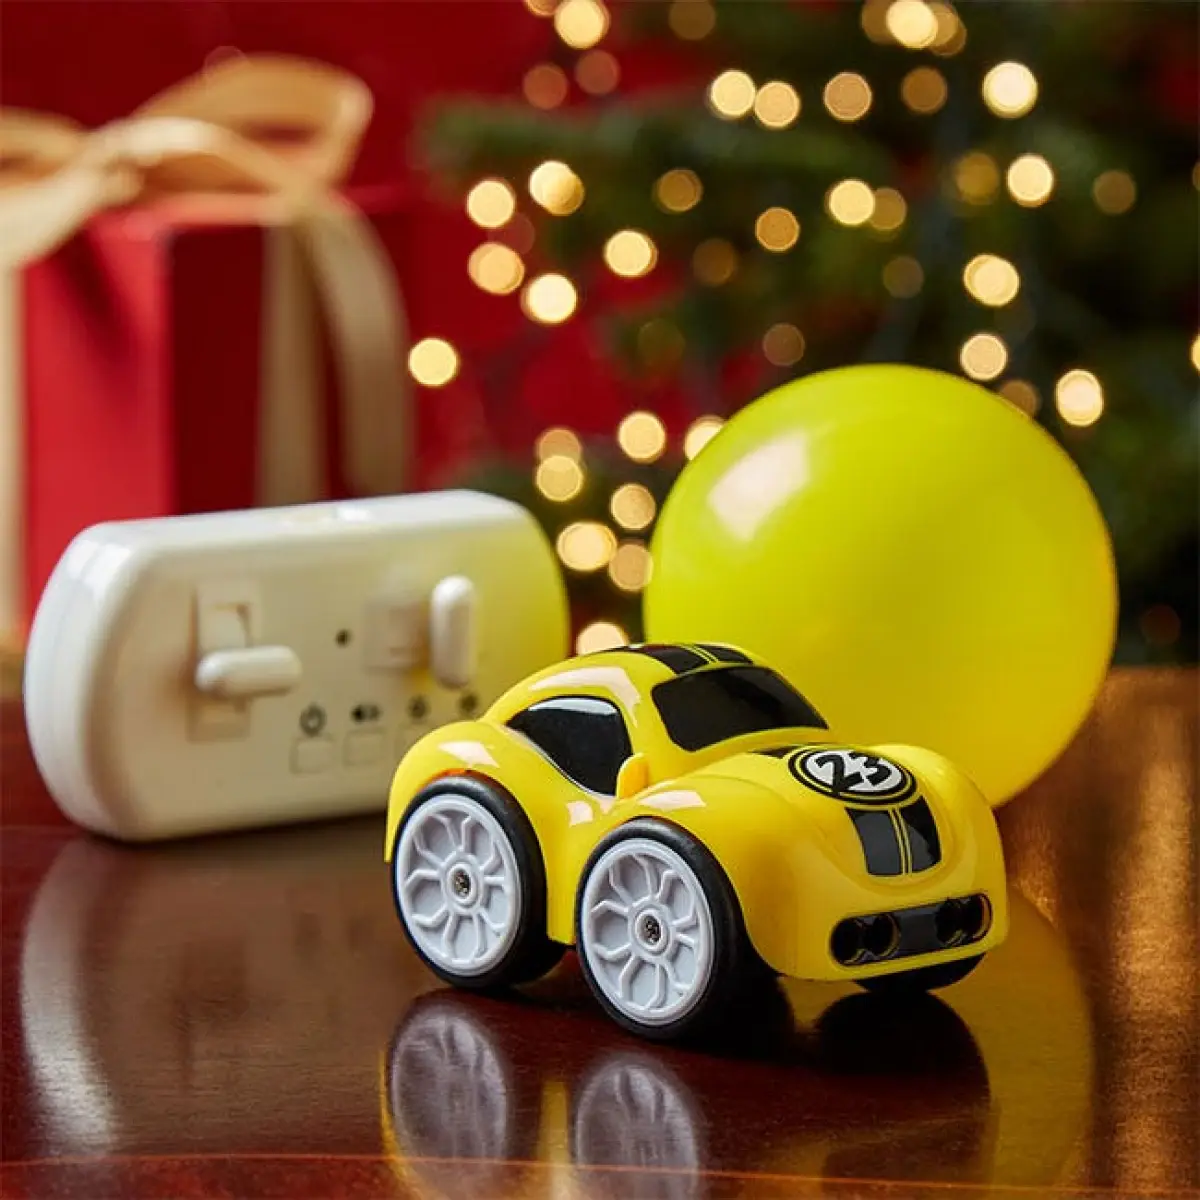 Ralleyz Magic Movement Car, Remote Control Toys for Kids, 5Y+, Yellow